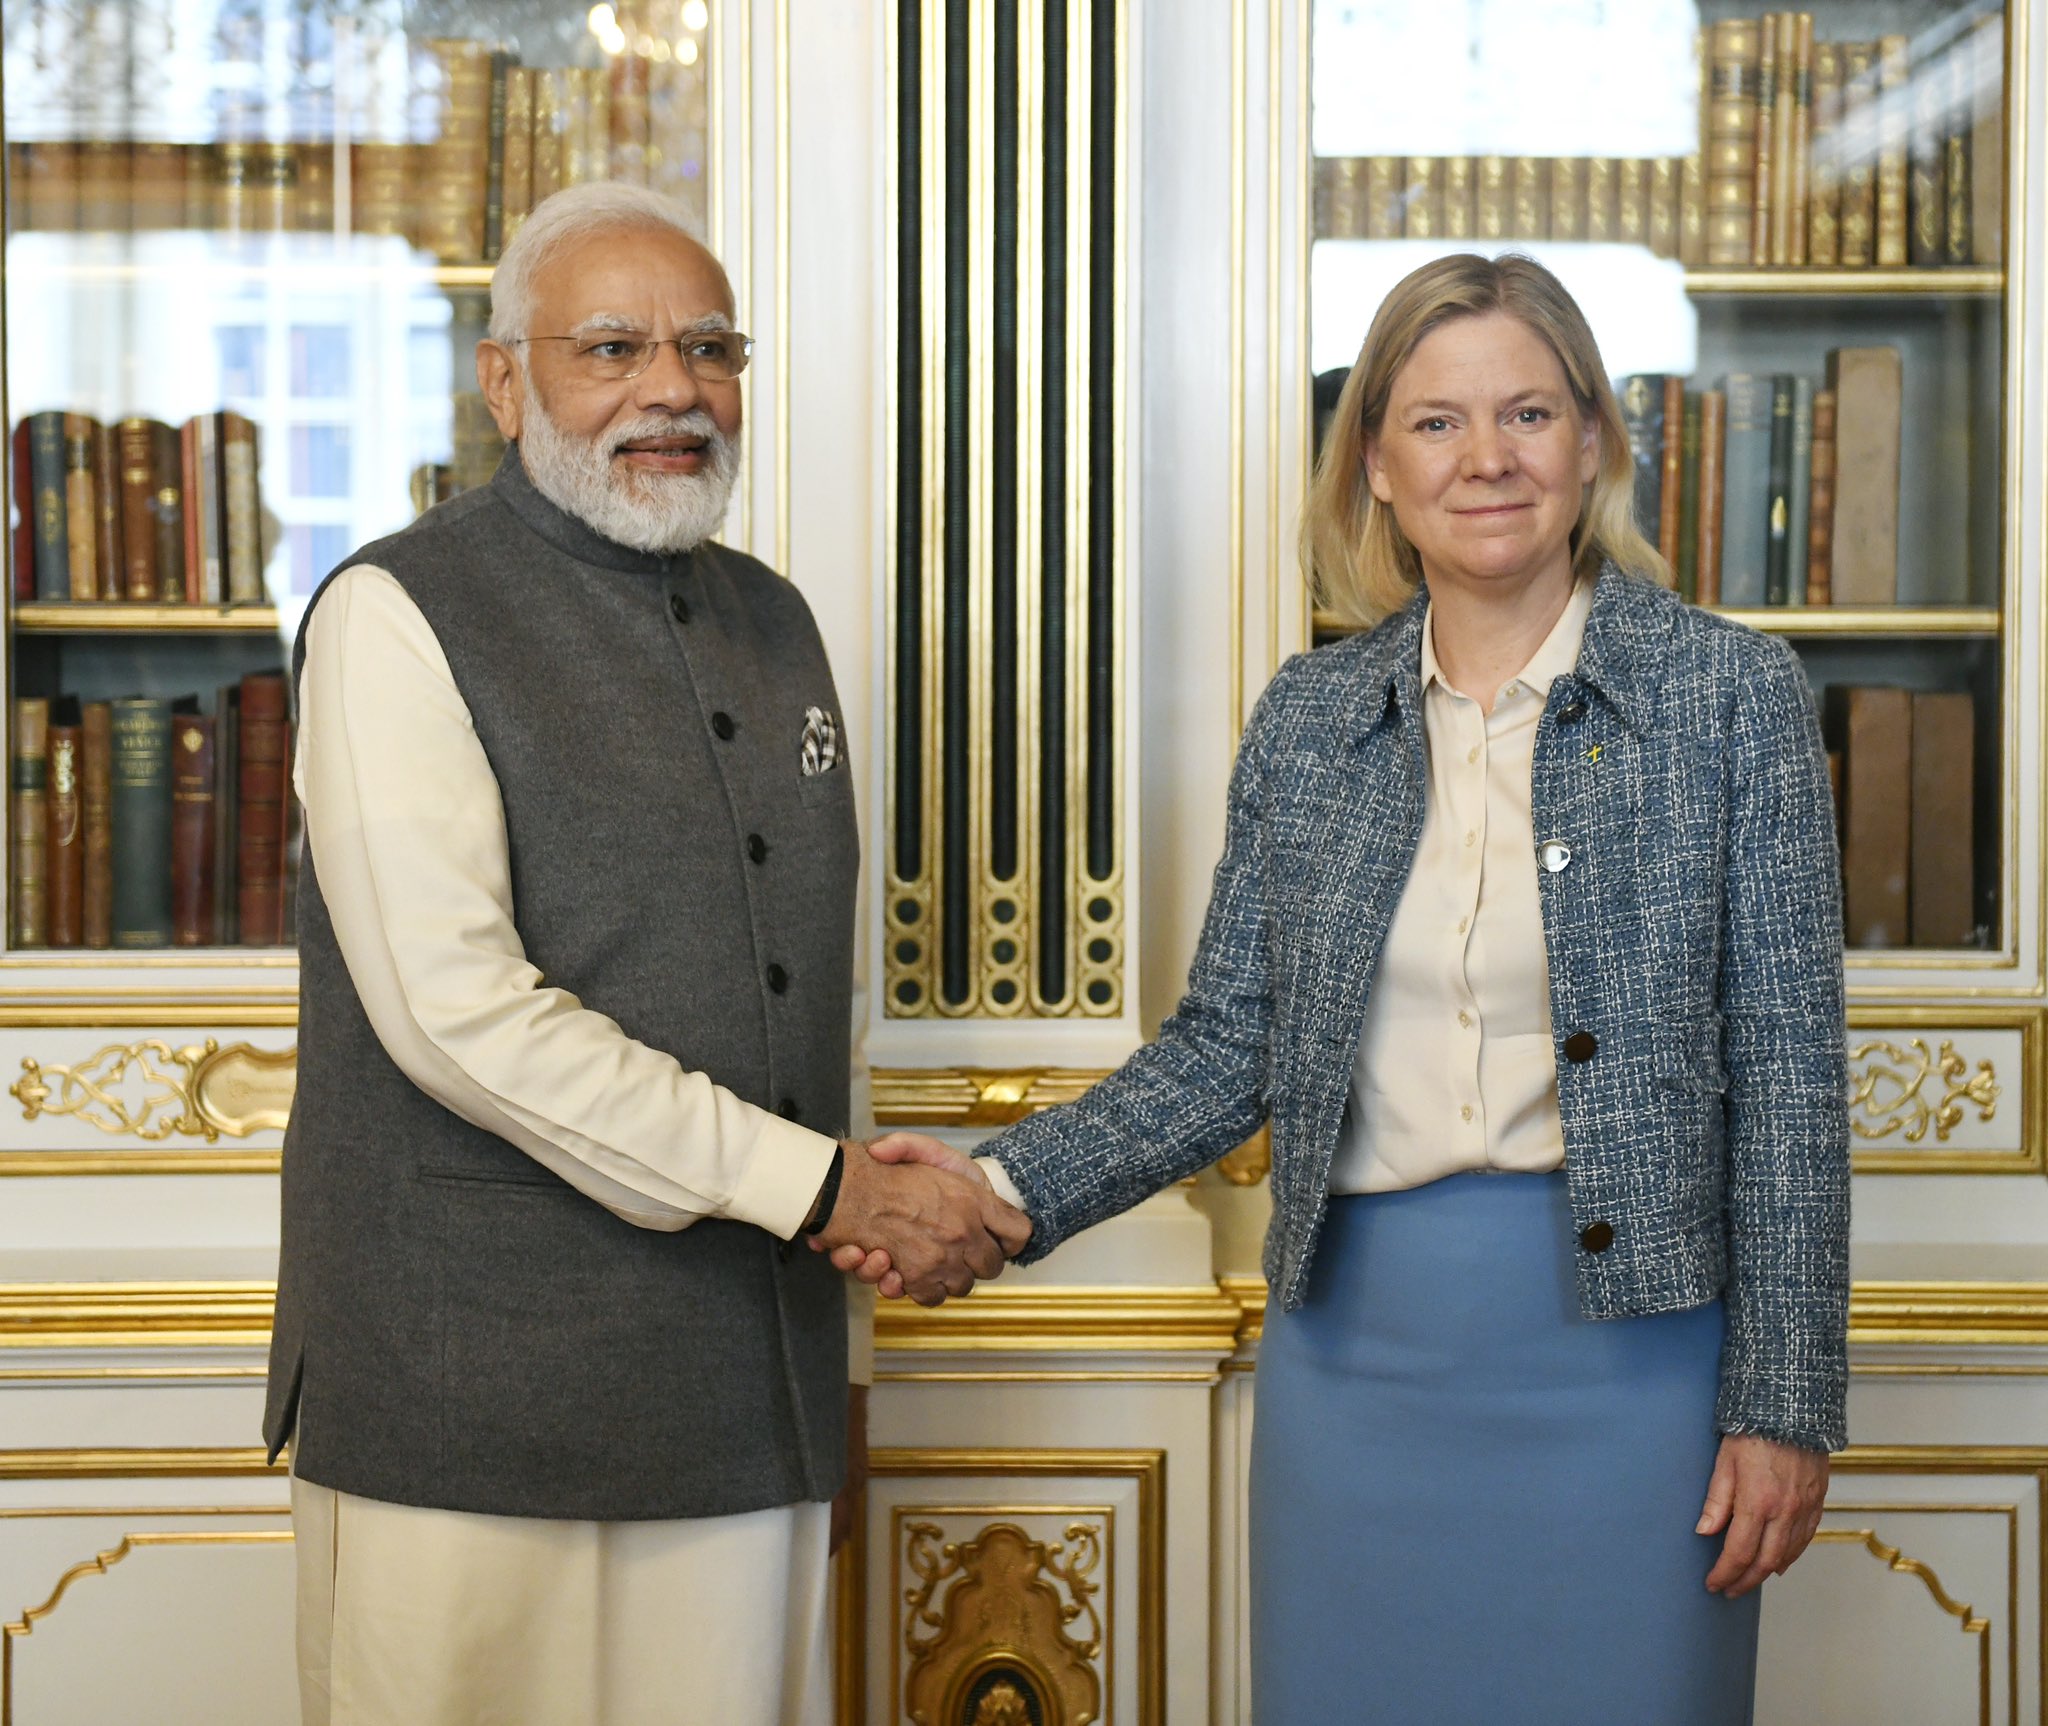 Prime Minister Modi’s meeting with Prime Minister of Sweden Ms. Magdalena Andersson